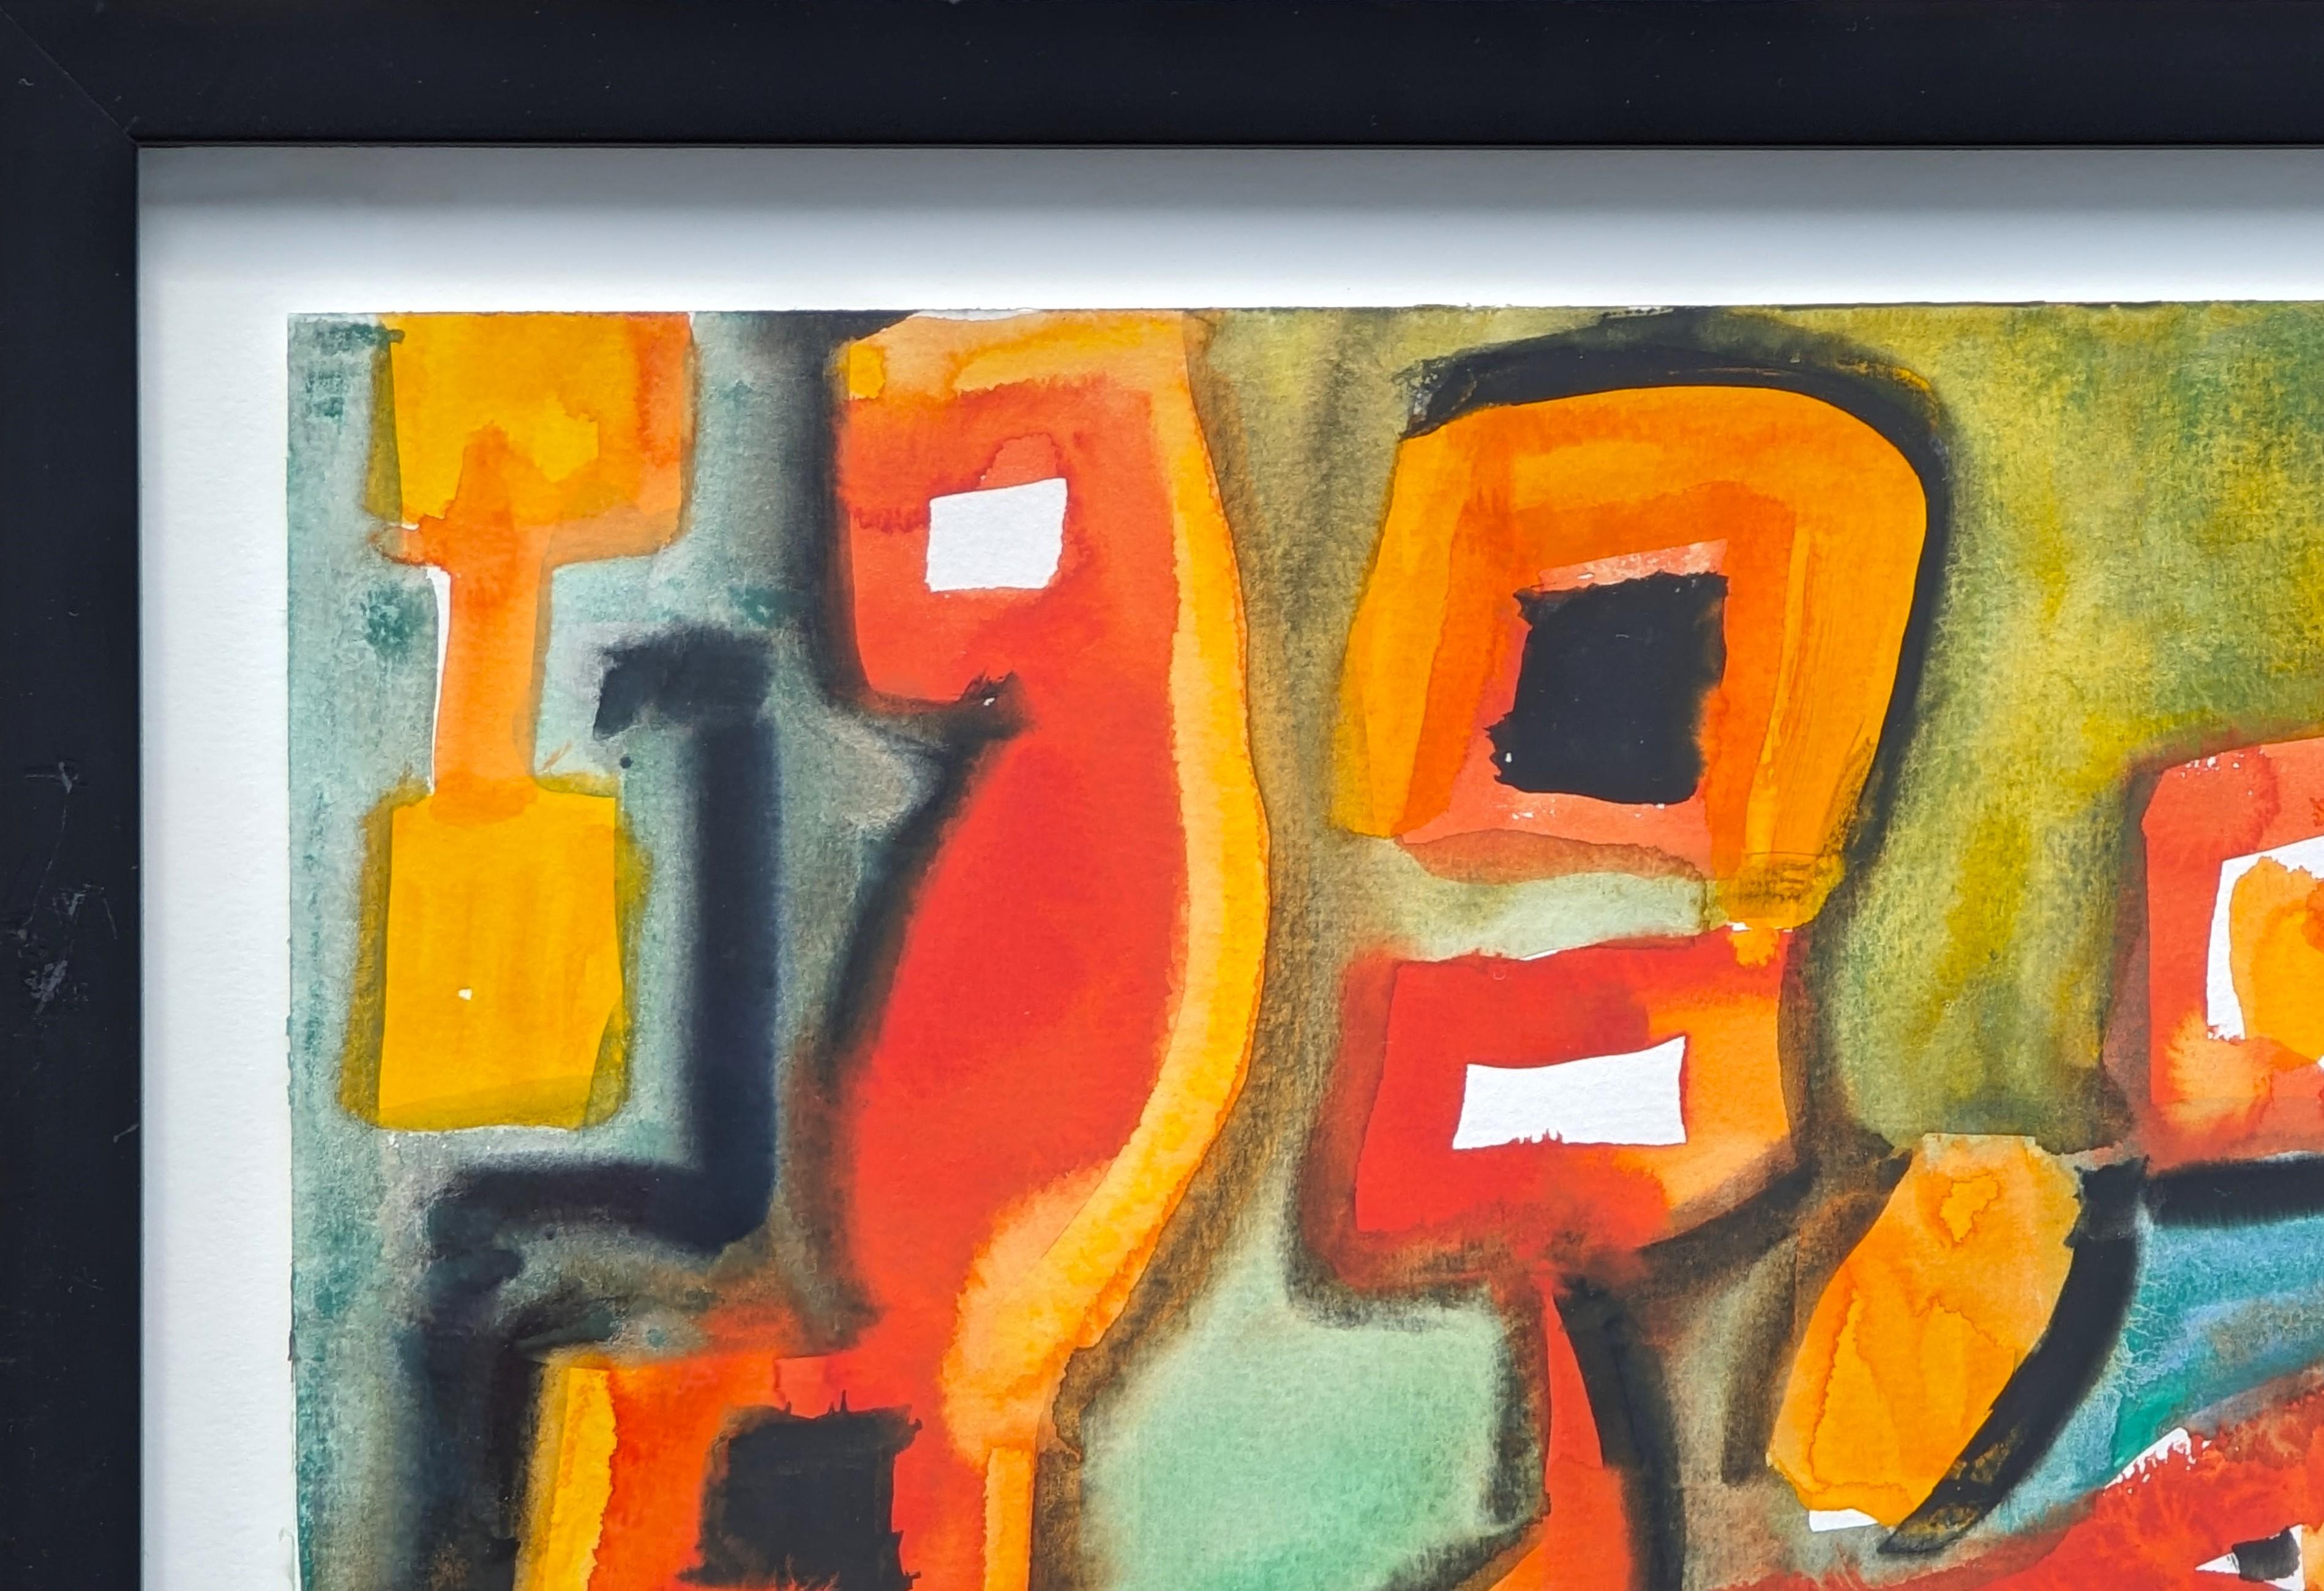 Modern abstract orange and yellow toned abstract watercolor painting by native Houstonian, Dick Wray. The work features warm toned curving organic shapes set against a green and blue toned background. Signed and dated along front lower margin.